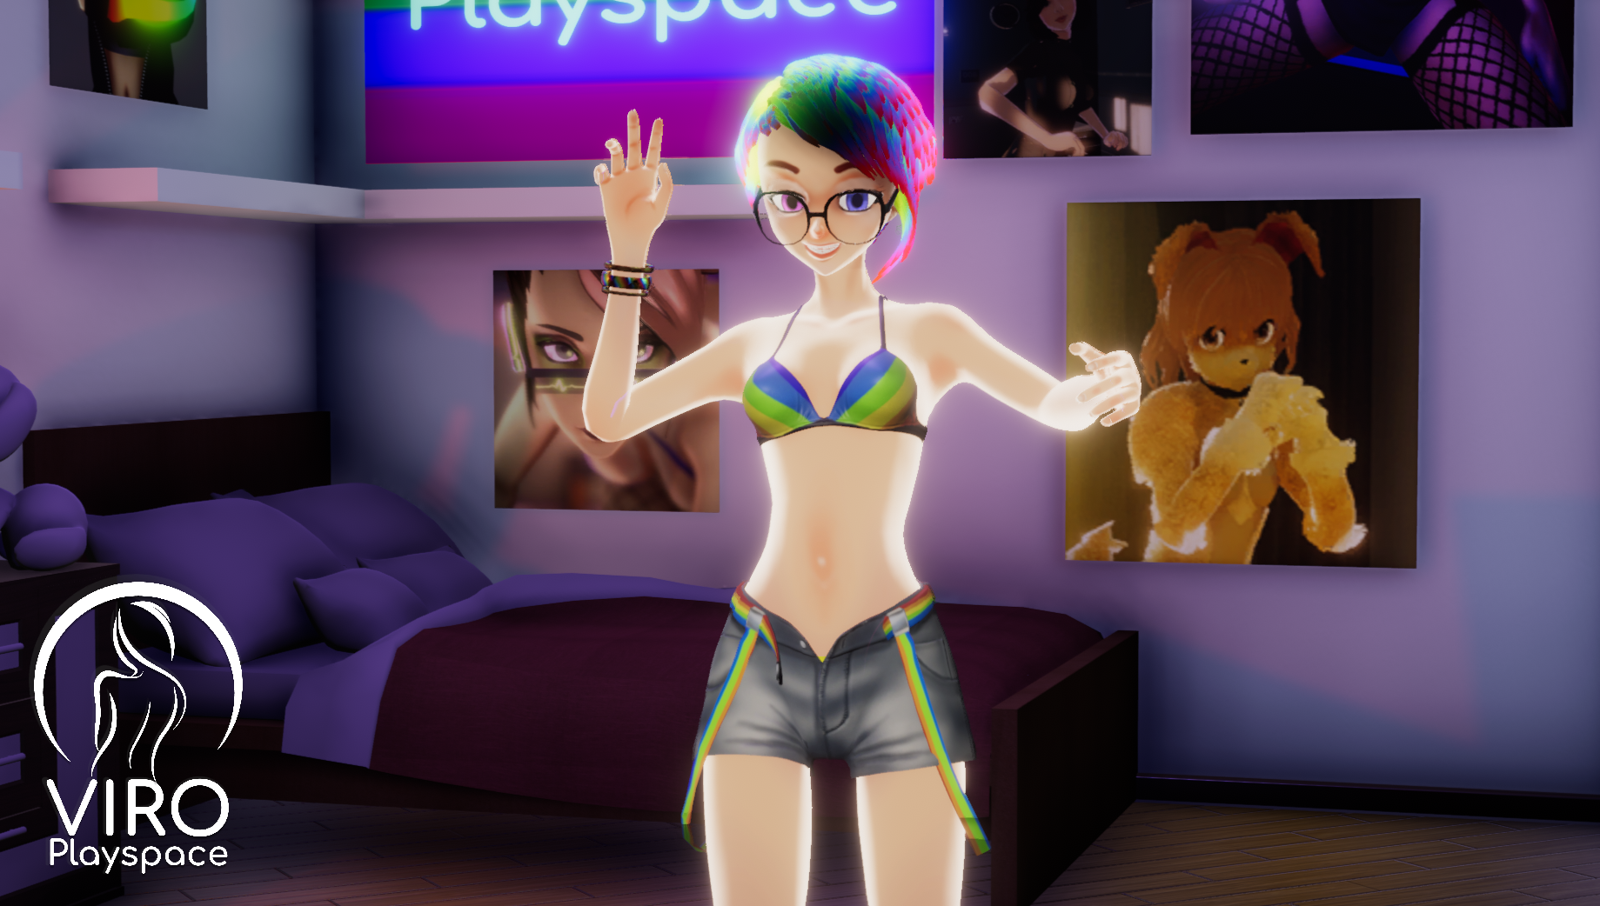 Photo by VexRuby with the username @VexRuby, who is a star user,  June 5, 2020 at 8:02 PM. The post is about the topic Hentai and the text says 'Hello Sharesome! I'm Vex Ruby, a virtual babe from ViRo Playspace! #HelloSharesome'